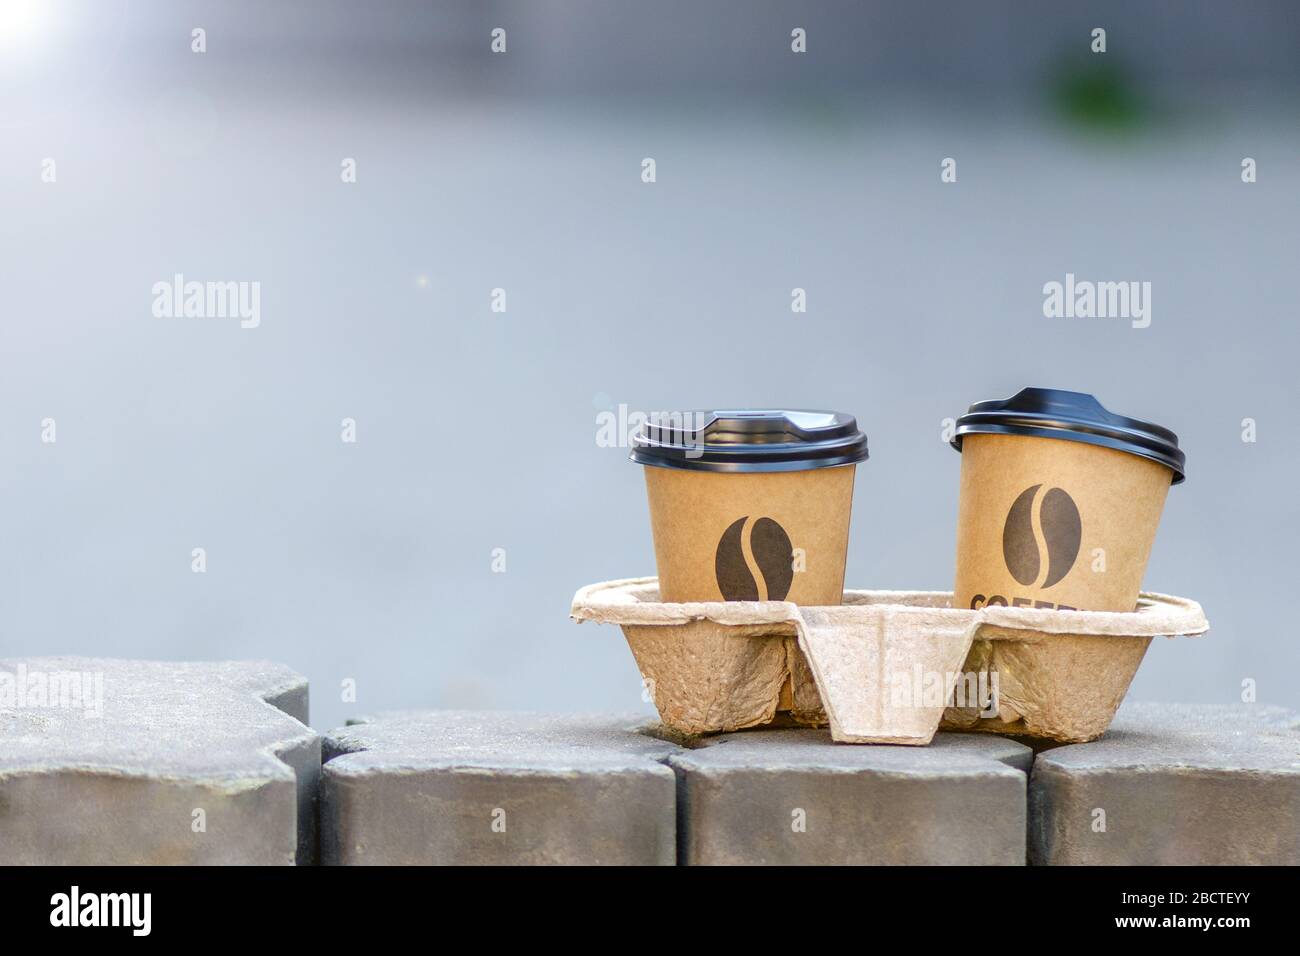 street coffee. 2 cups of coffee in the holder. Takeaway coffee is standing on the street. concept of communication with friends Stock Photo